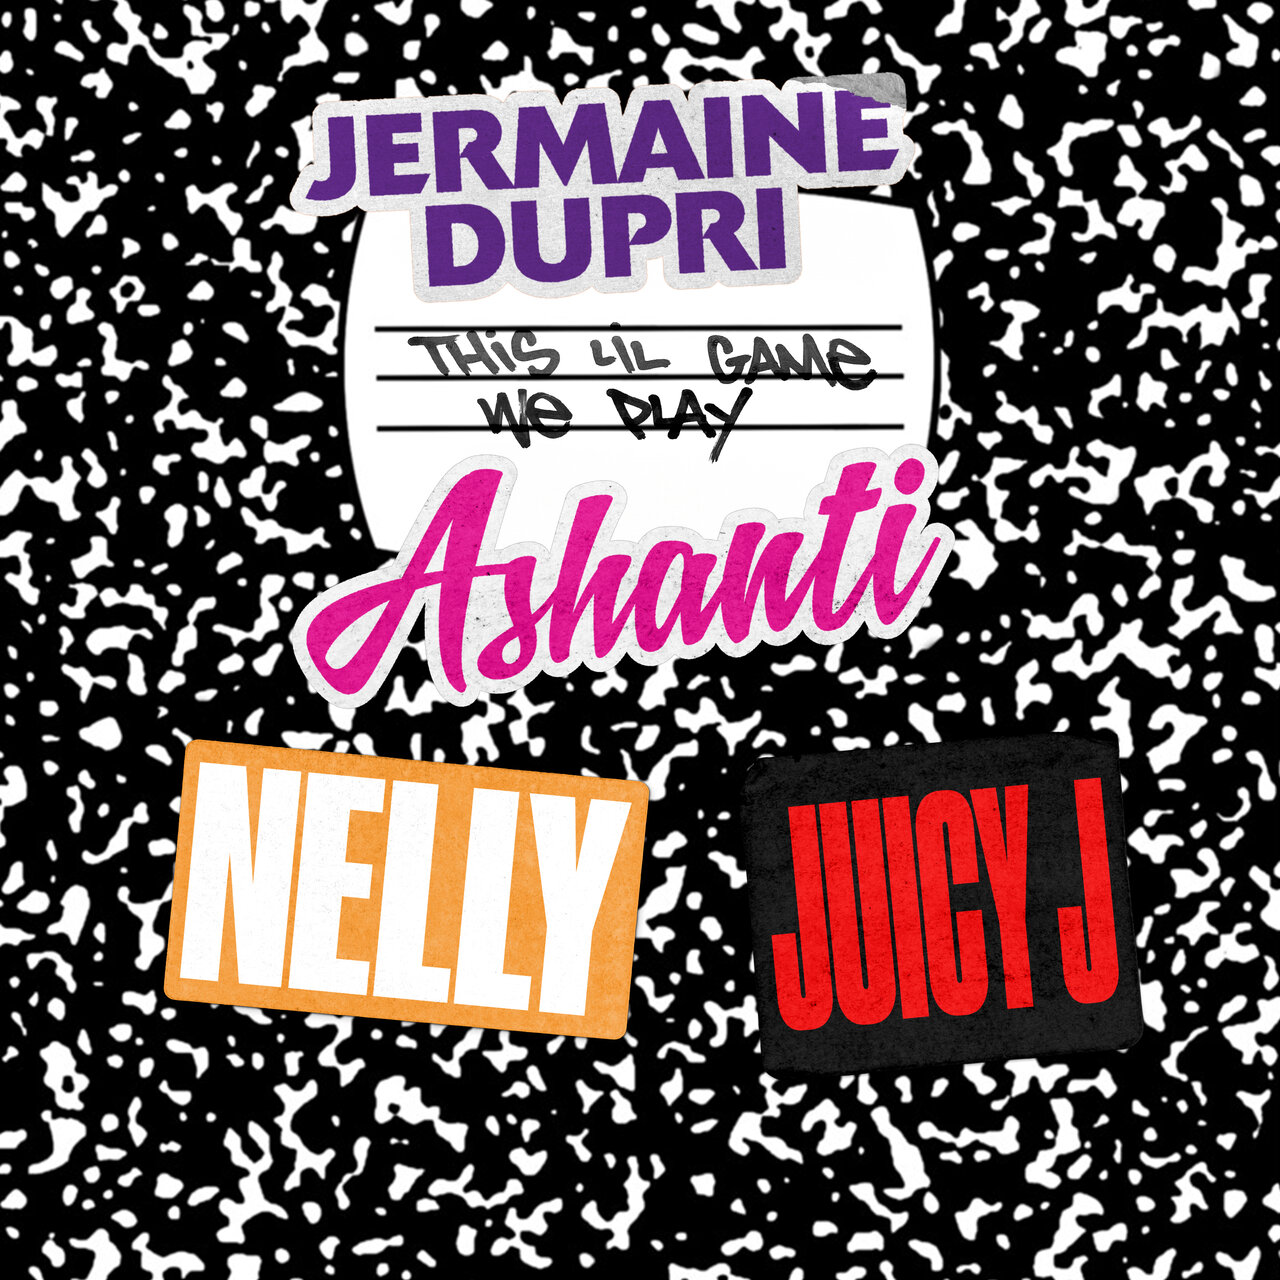 Jermaine Dupri ft. featuring Ashanti, Nelly, & Juicy J This Lil&#039; Game We Play cover artwork